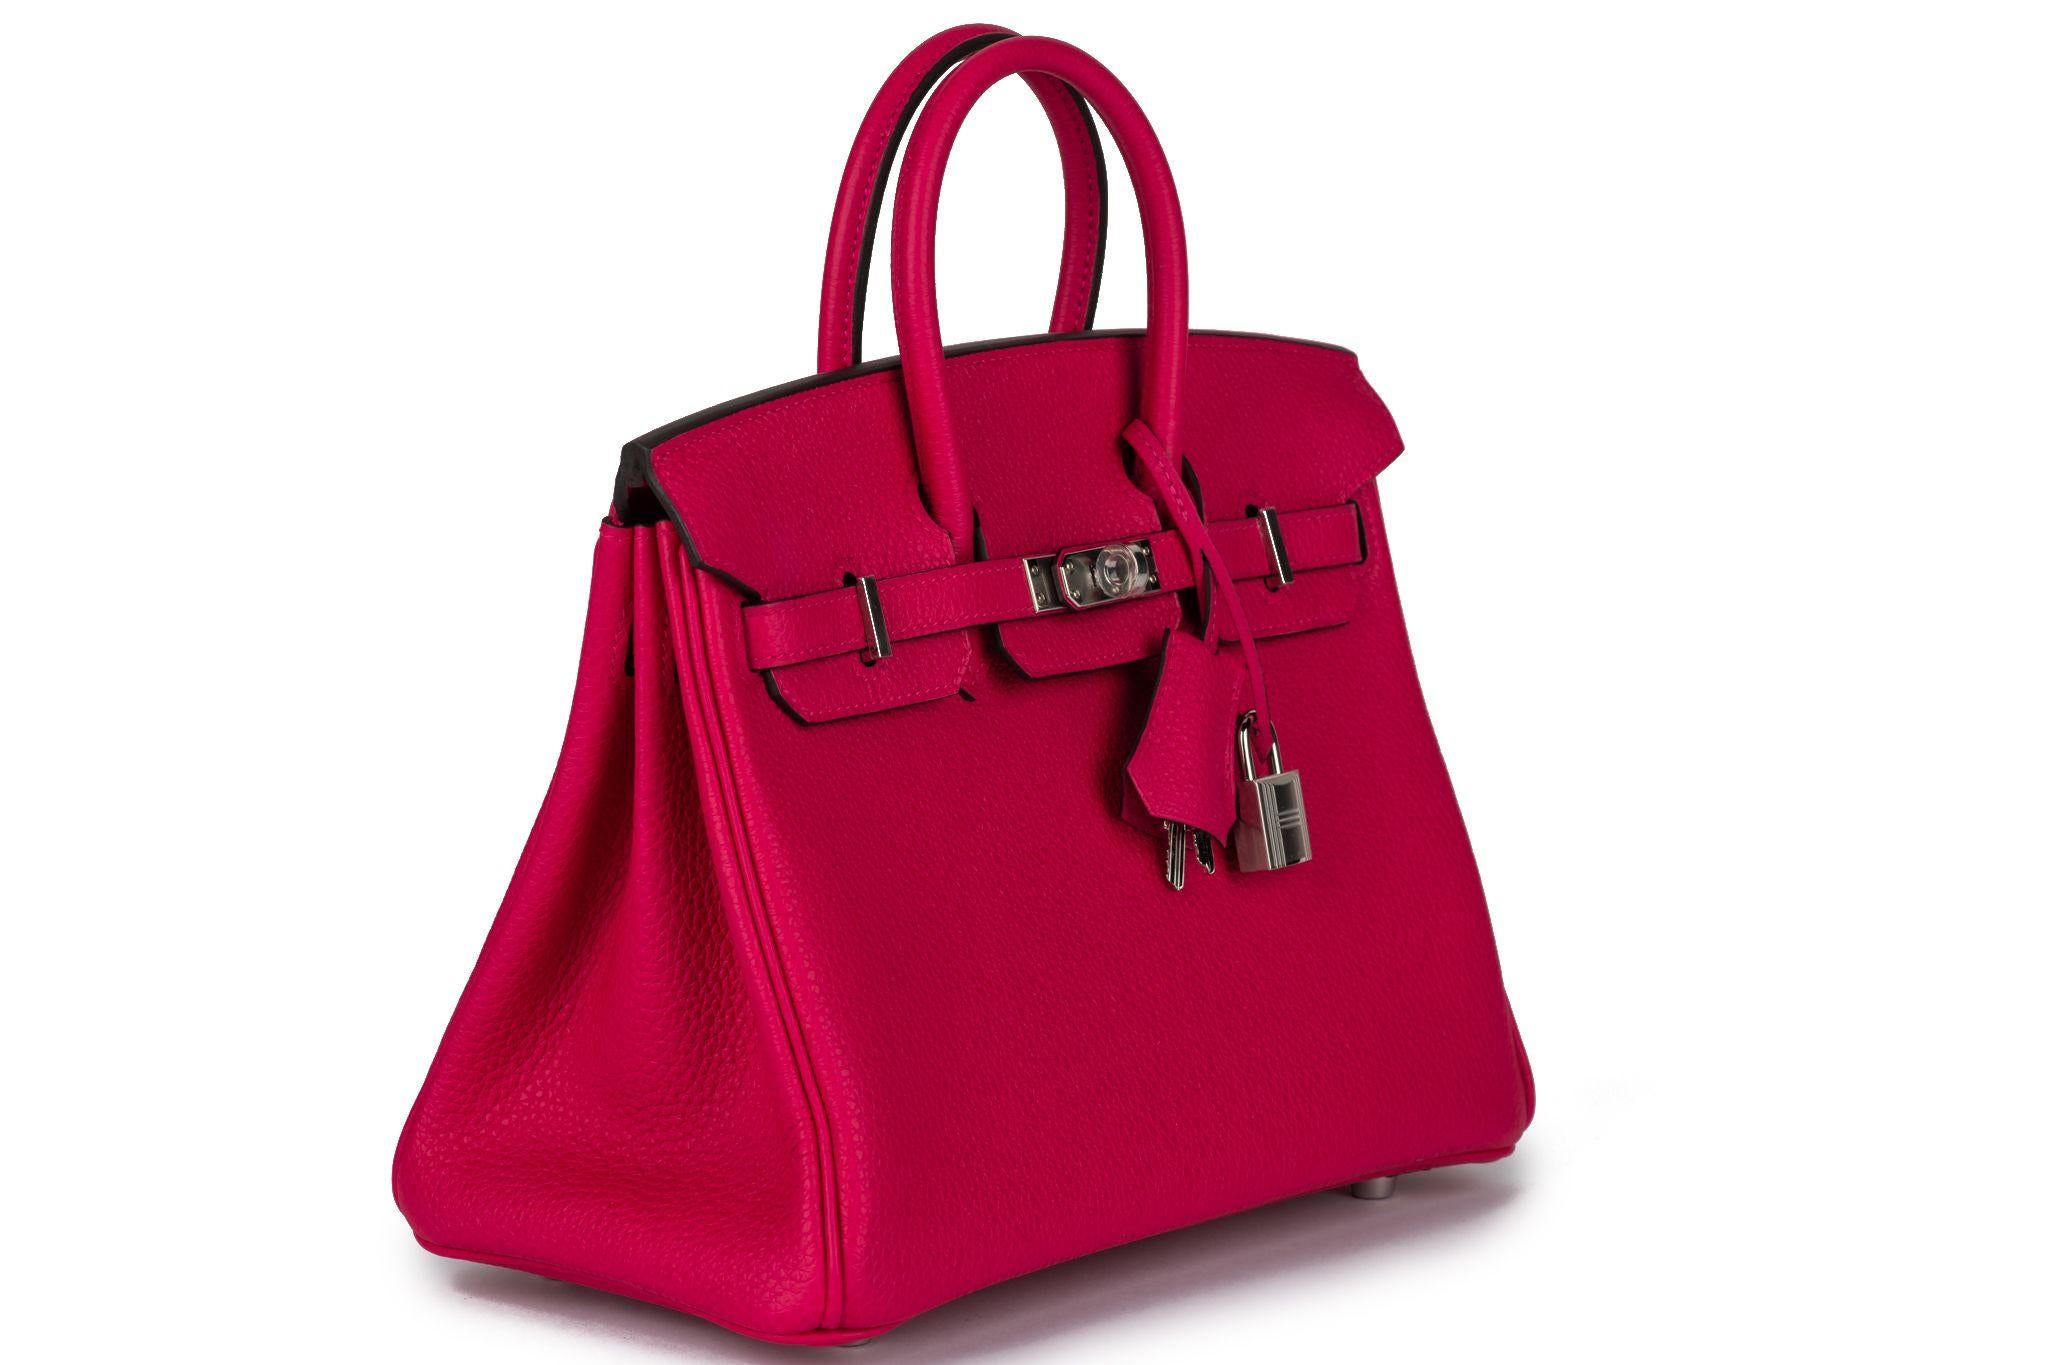 HERMÈS Birkin 25 crafted of Togo leather in a rose mexico color with palladium hardware. The piece is new and very sought after. Date stamp U for 2023. It comes with the full set: clochette, tirette, lock, keys, dust cover, rain jacket and the box.